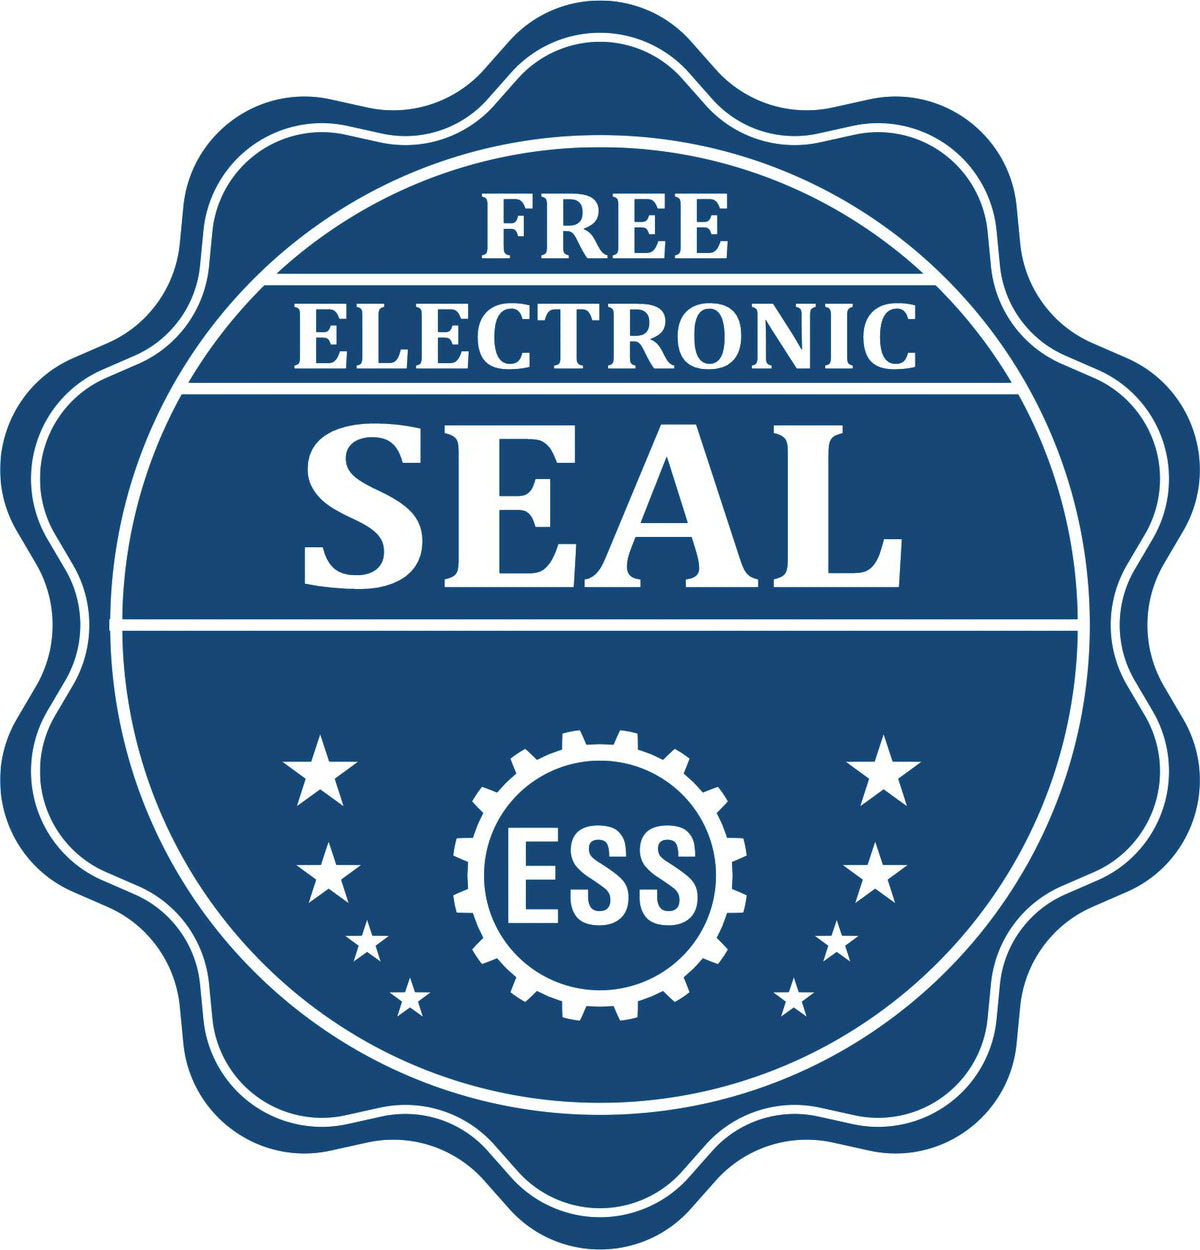 A badge showing a free electronic seal for the State of Arizona Extended Long Reach Engineer Seal with stars and the ESS gear on the emblem.